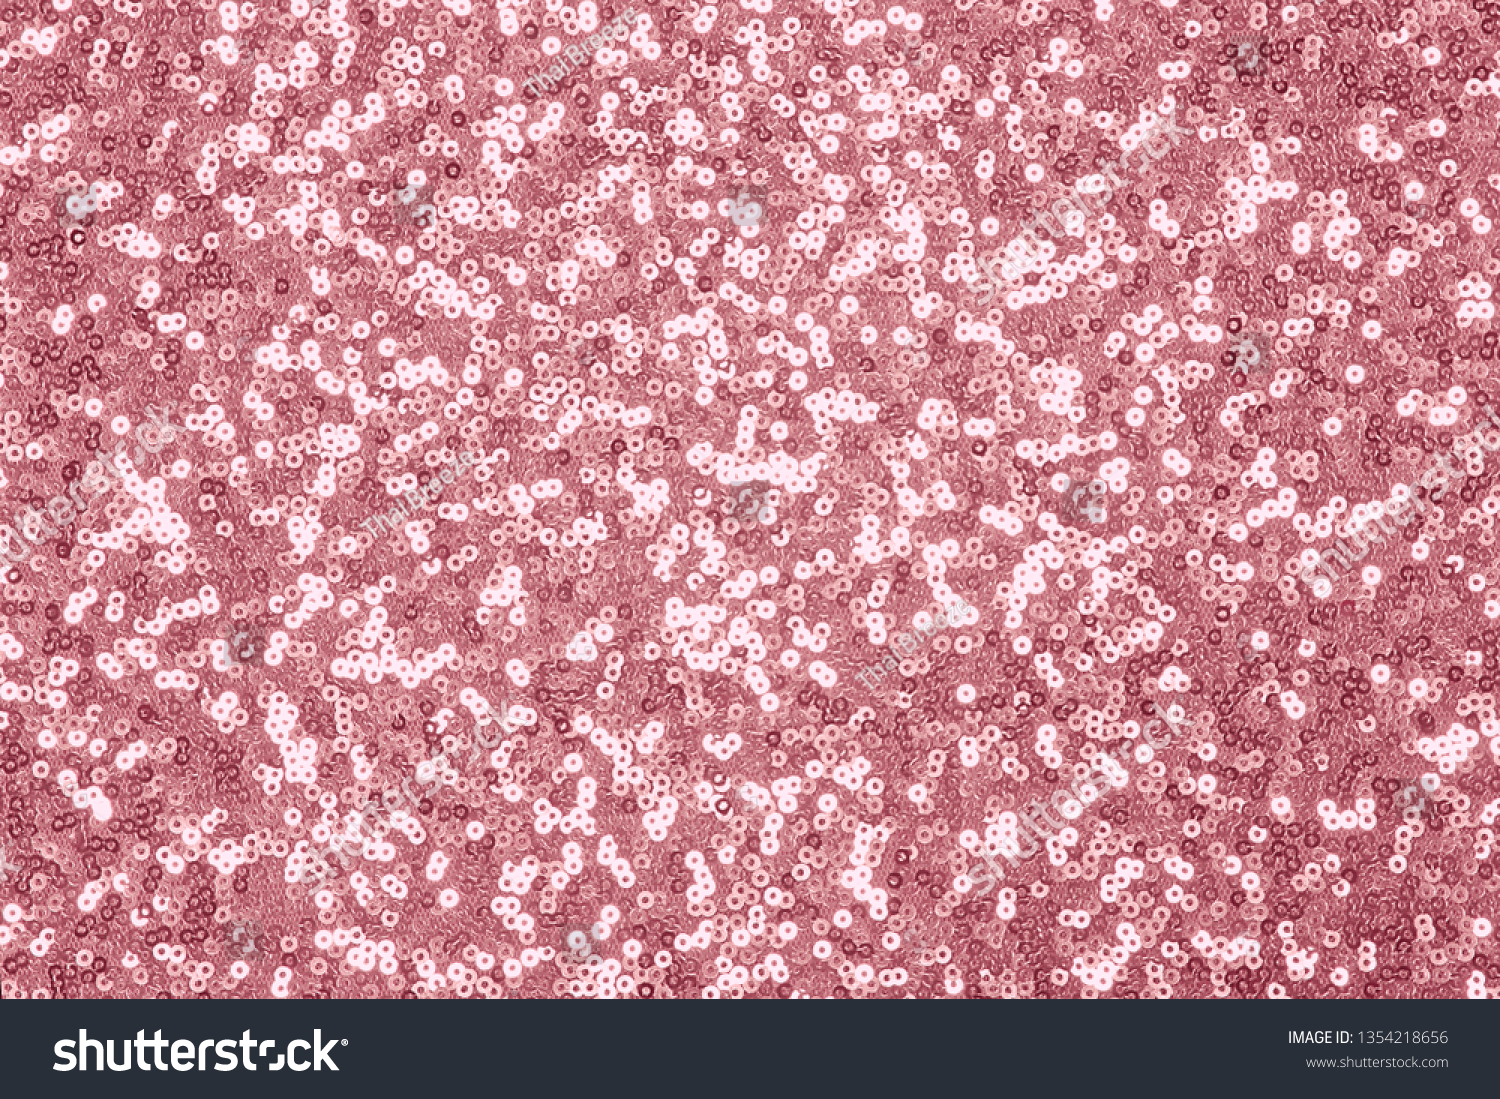 Background sequin. sequin BACKGROUND. glitter surfactant. Holiday abstract glitter background with blinking lights. Fabric sequins in bright colors. #1354218656